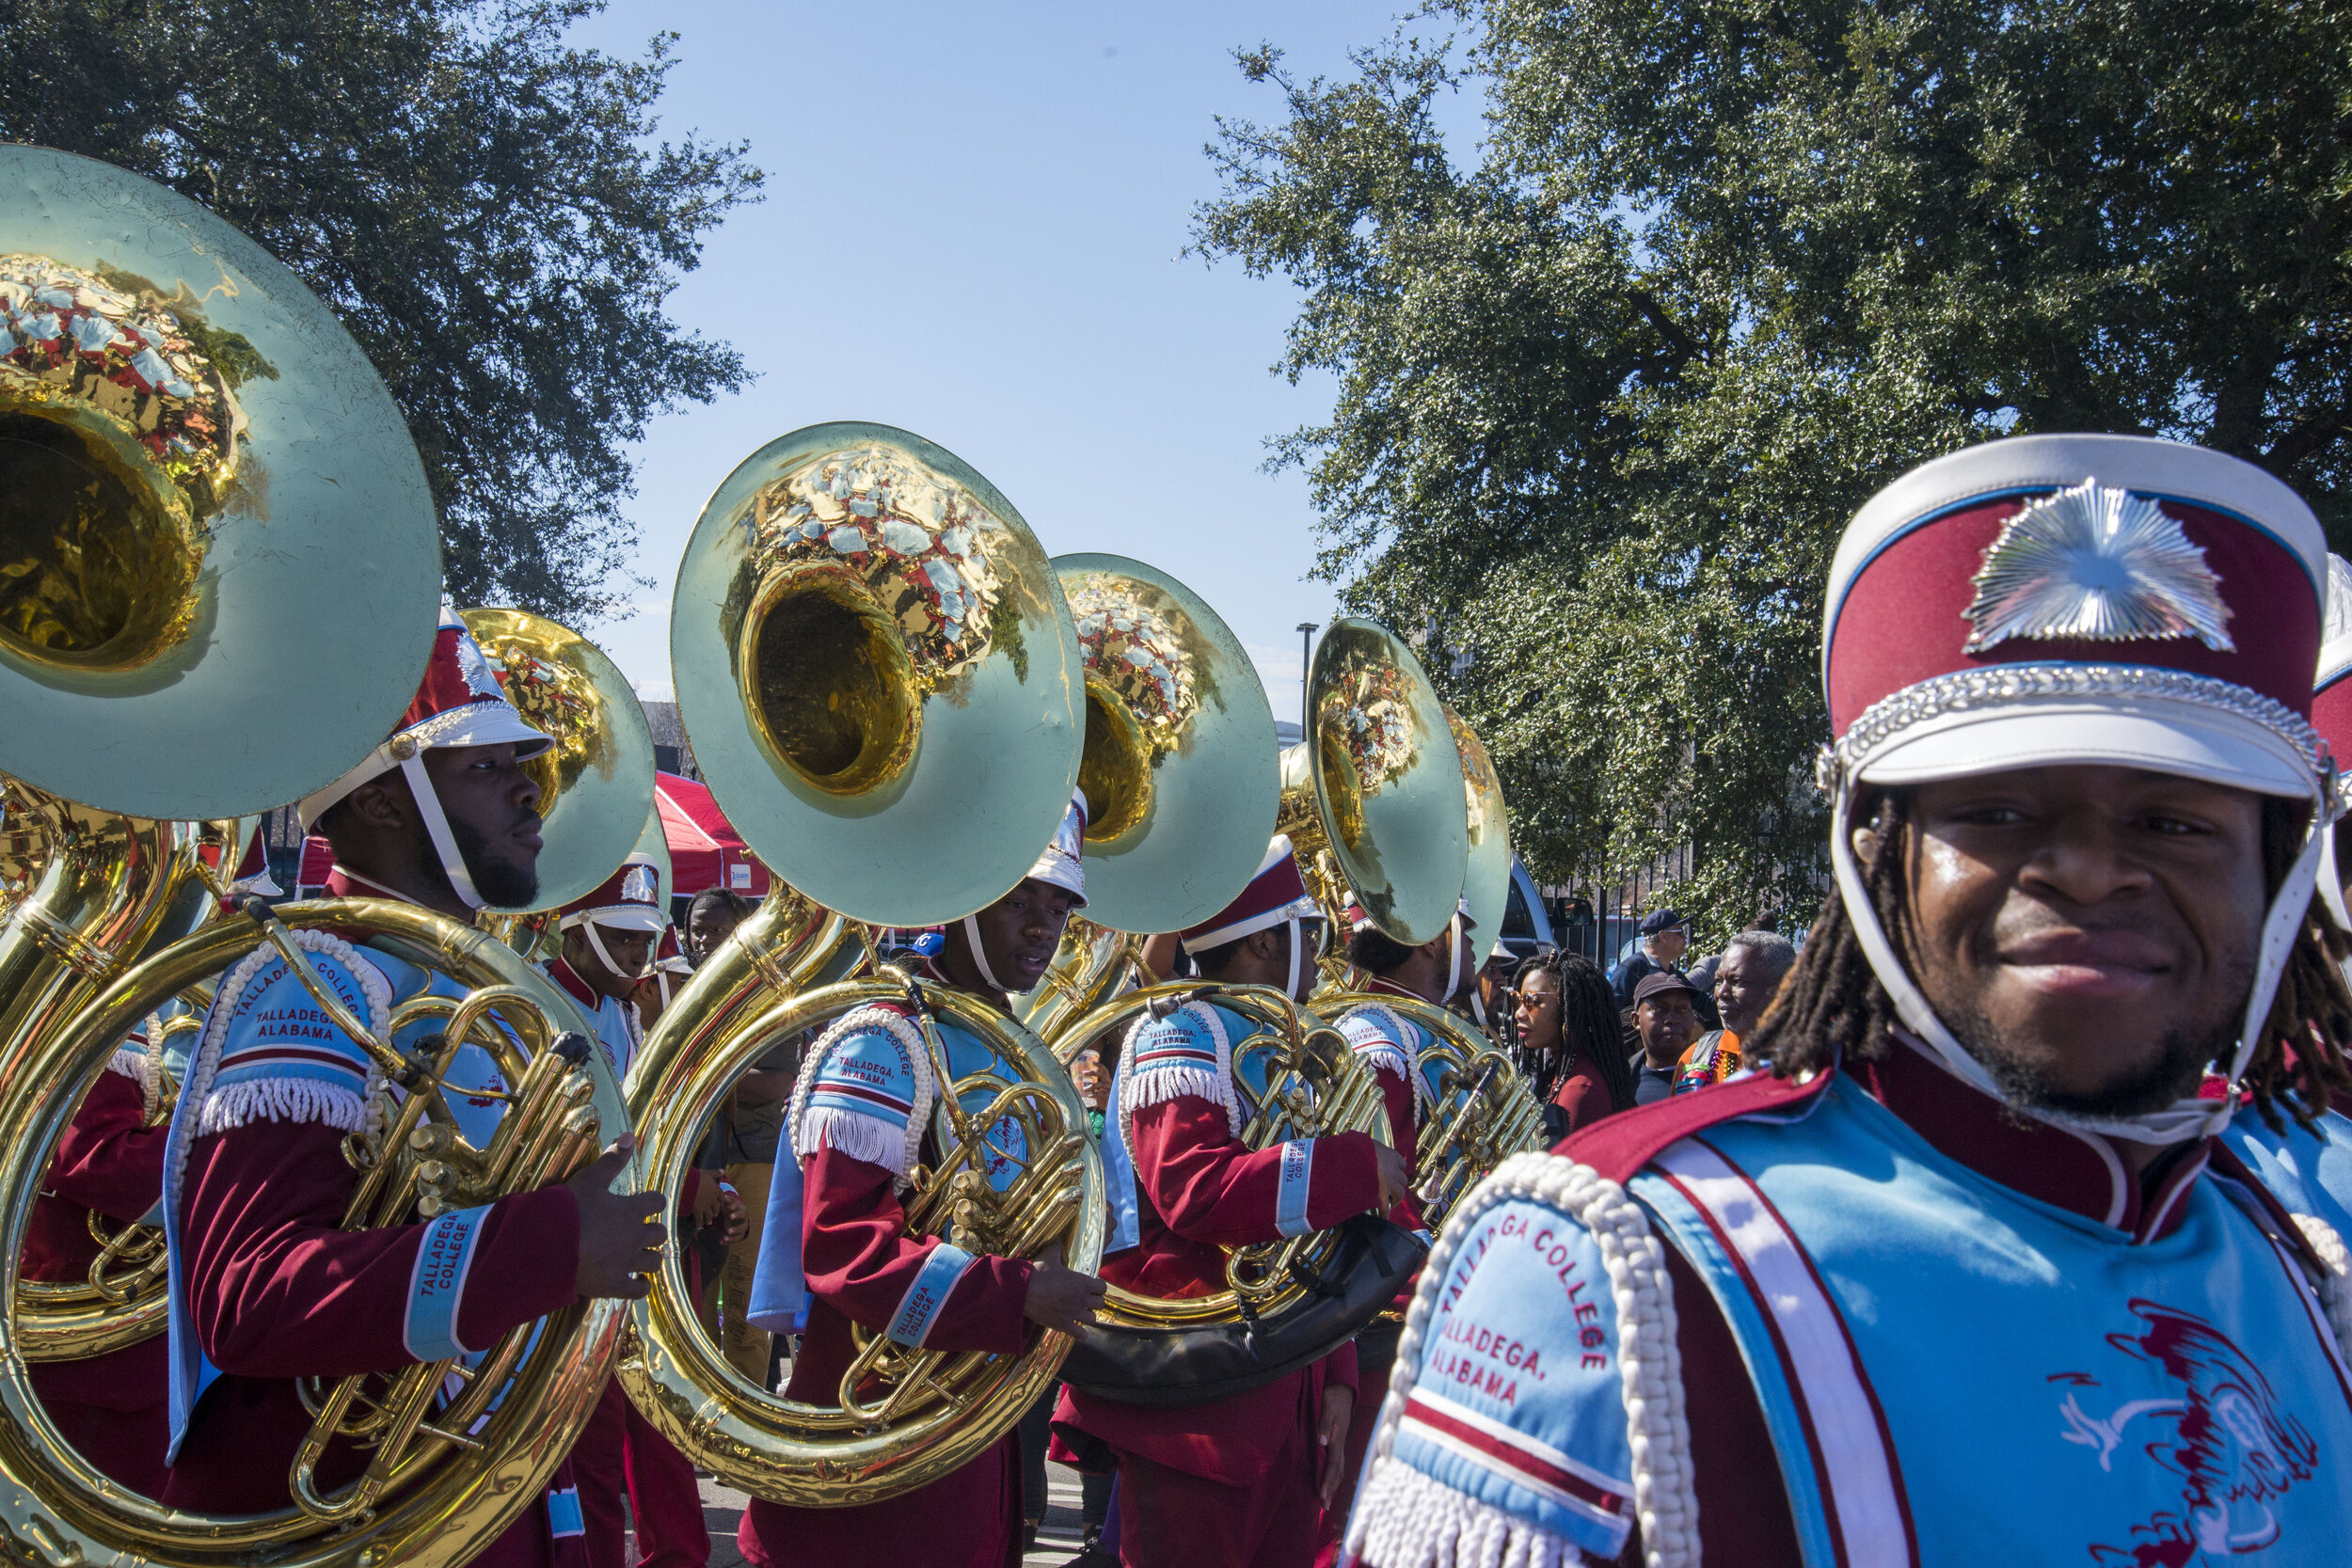 marching band with tubas.jpg